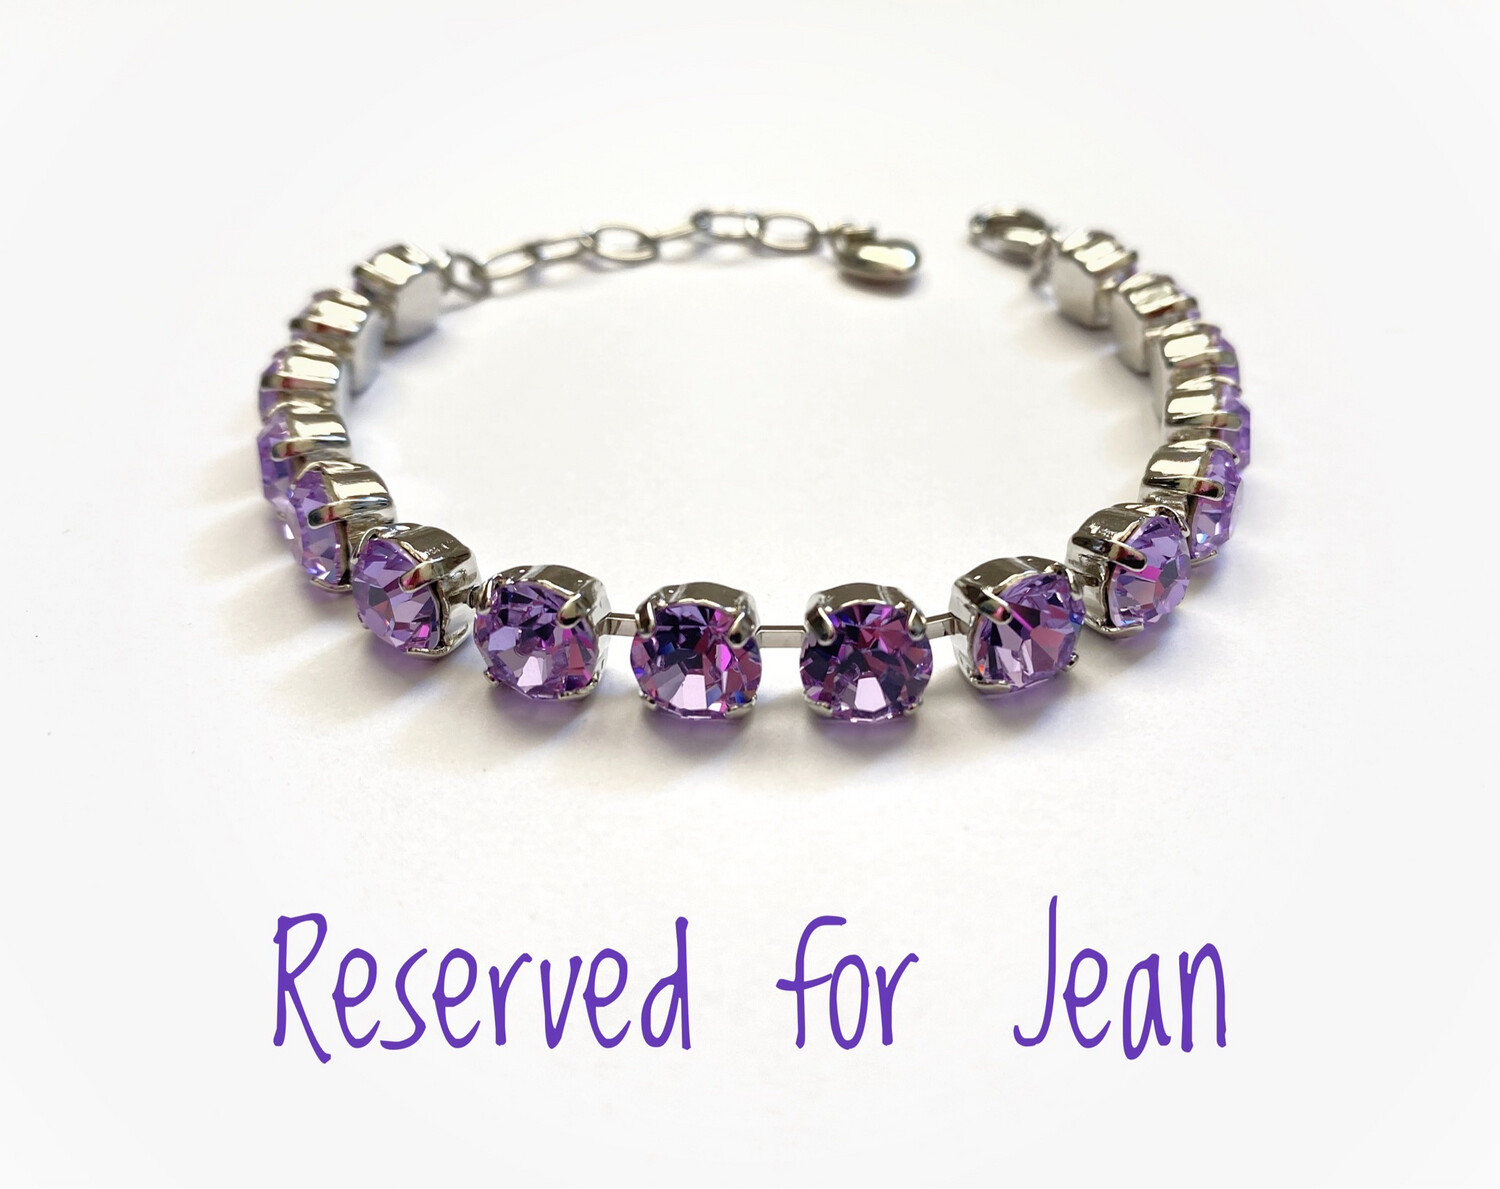 Reserved for Jean